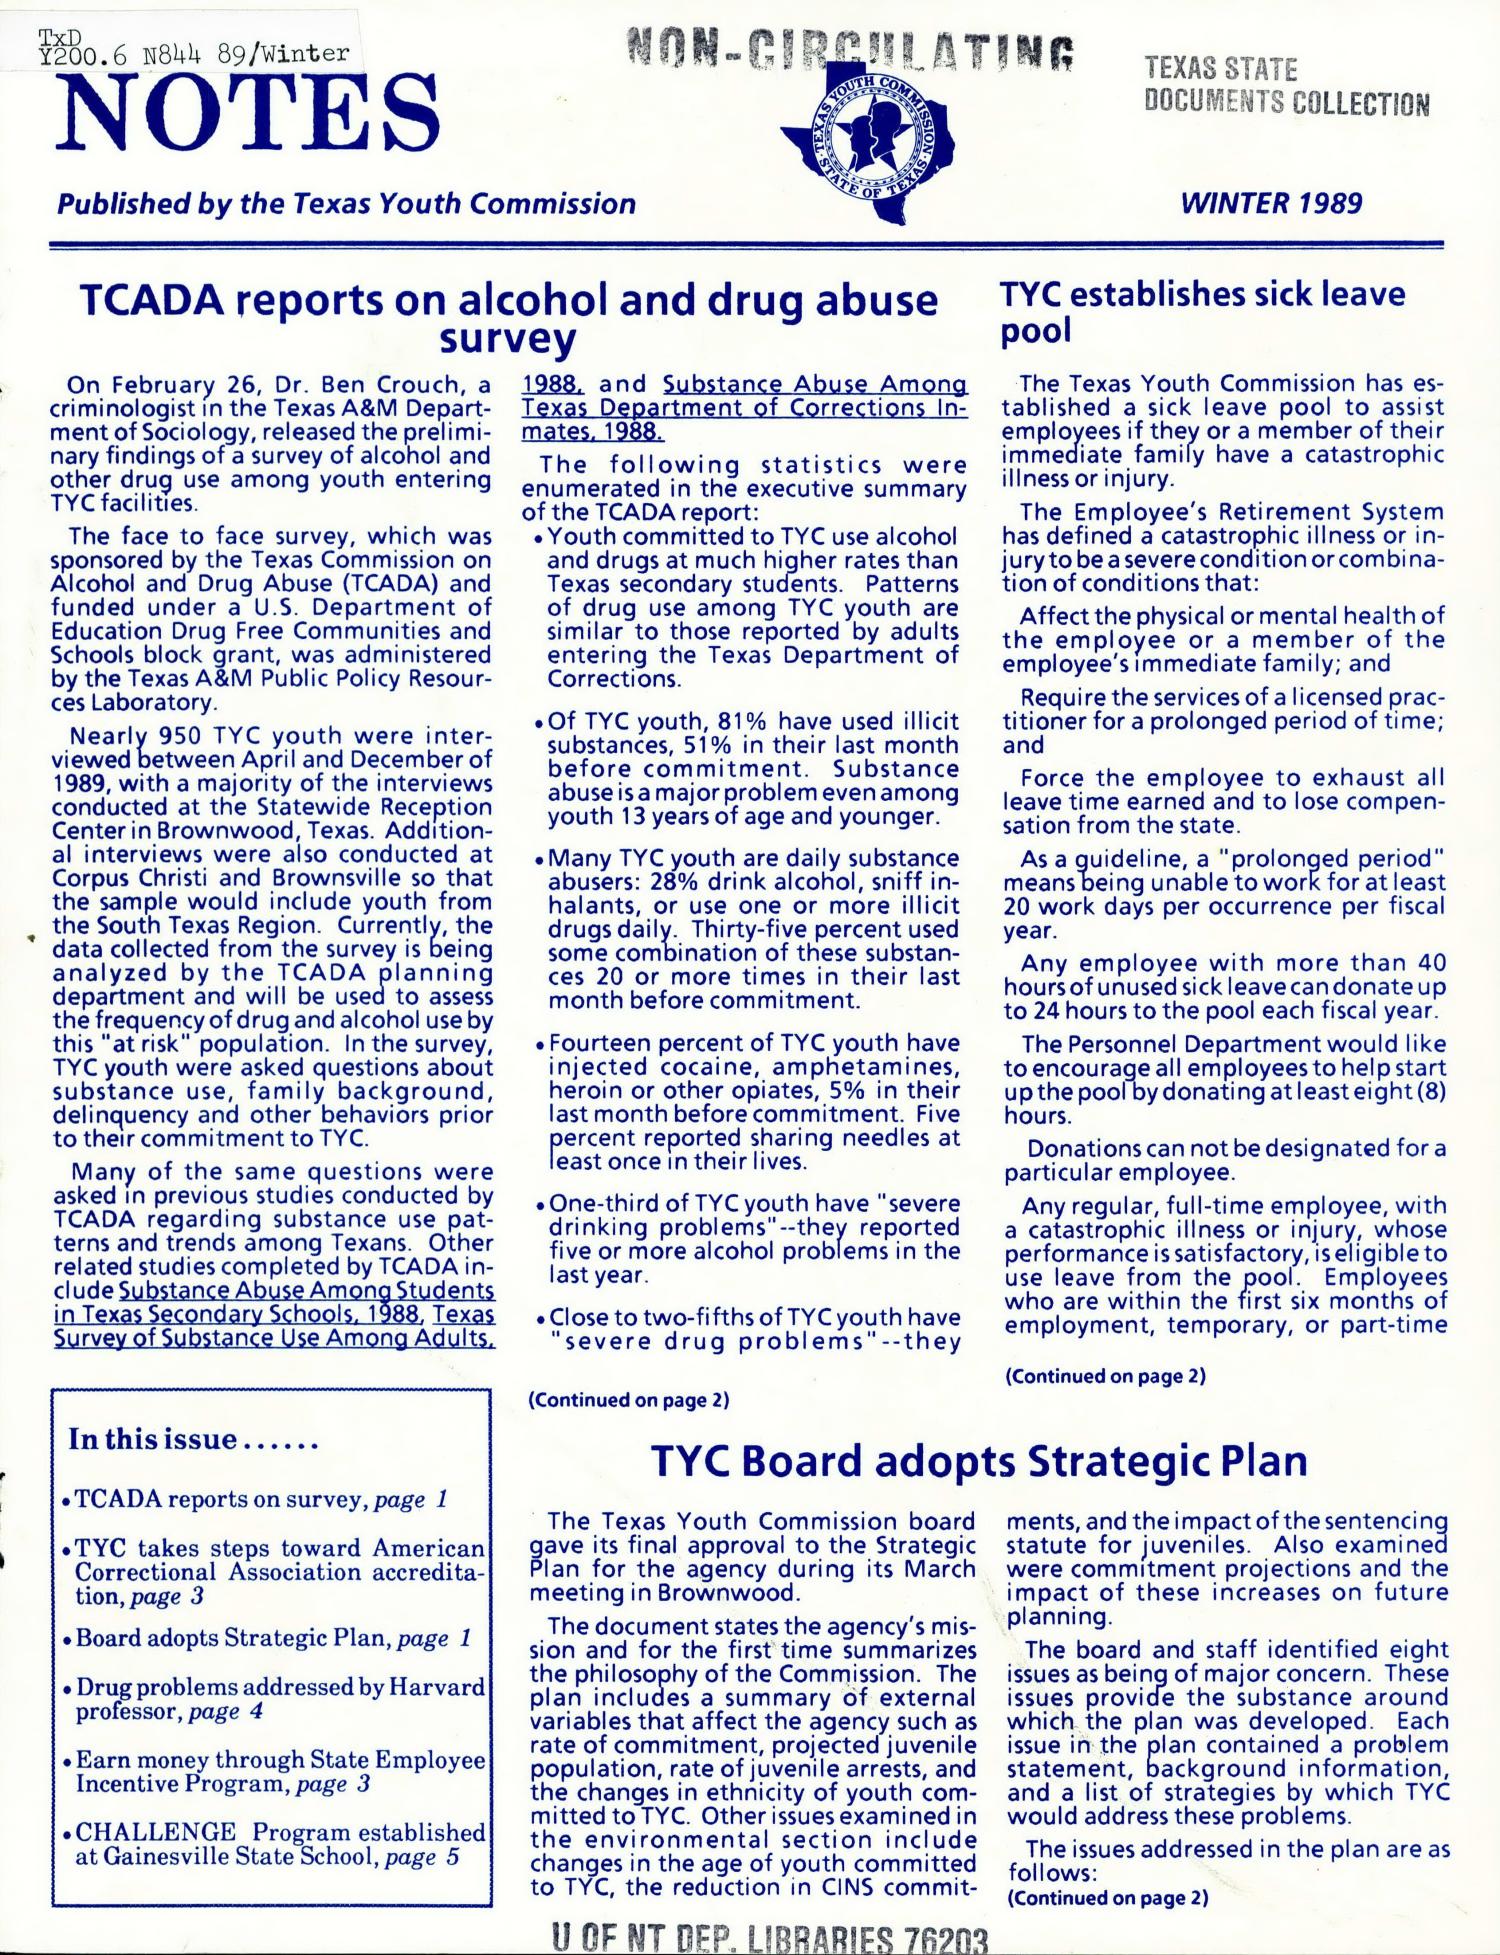 Texas Youth Commission Notes, Winter 1989
                                                
                                                    Front Cover
                                                